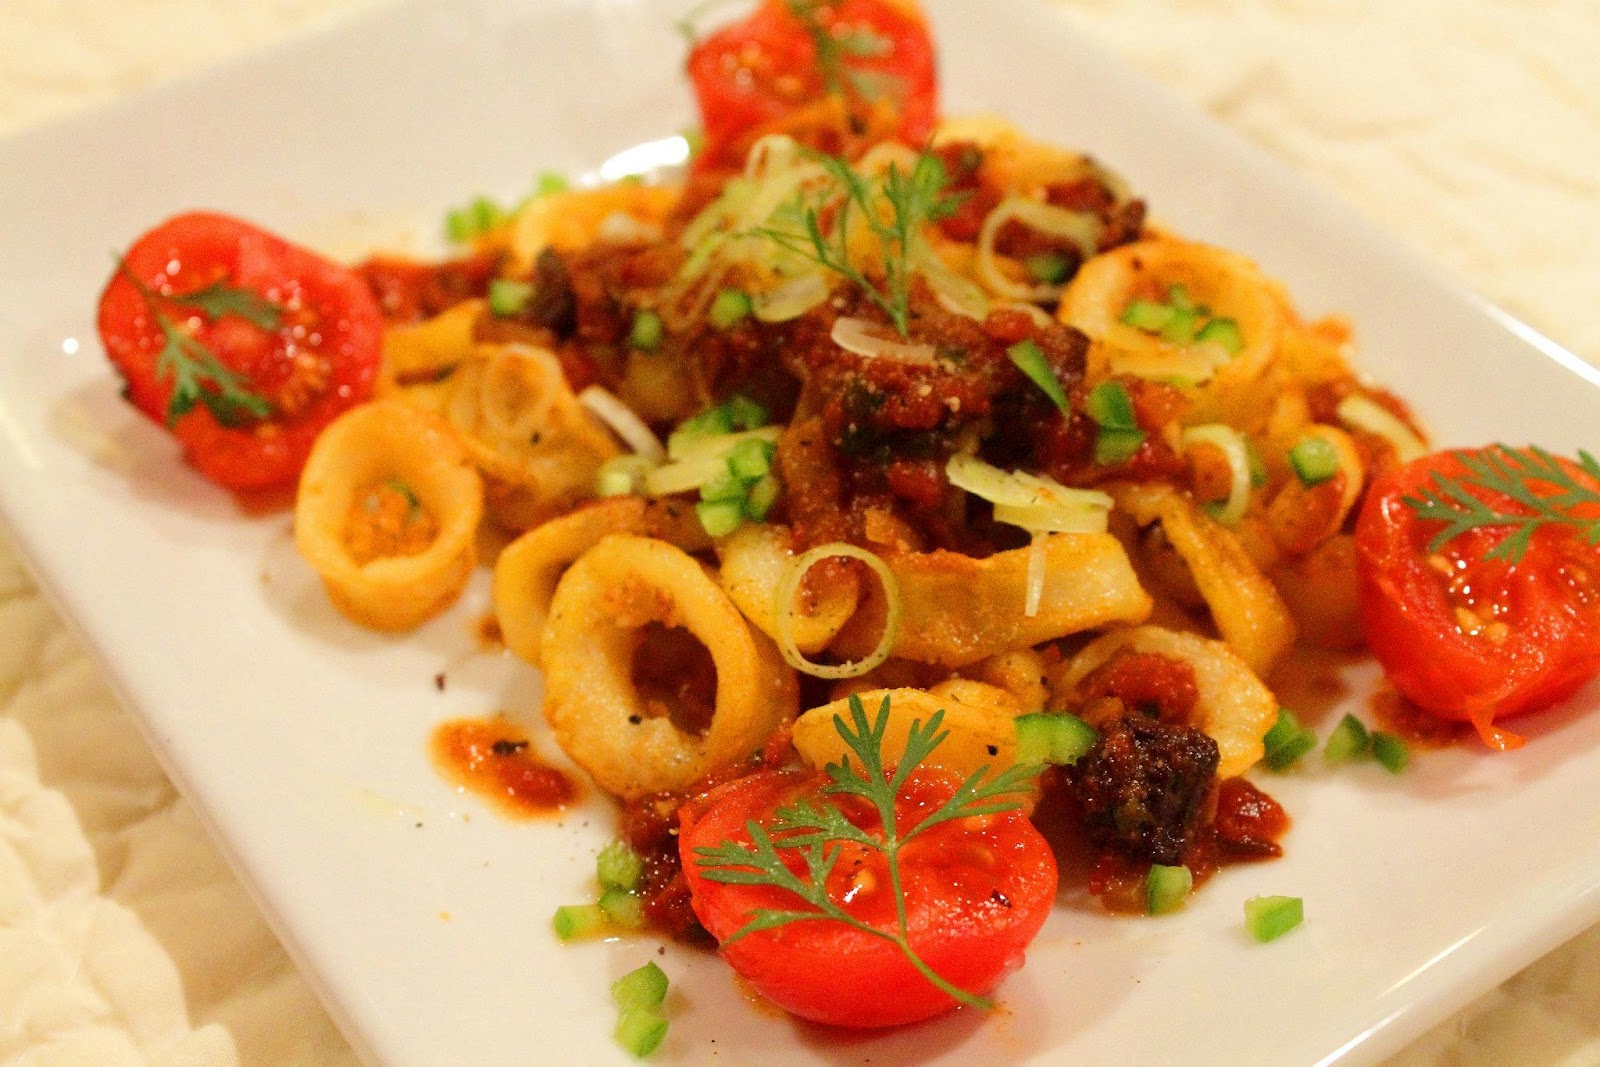 Calamari with Roasted Tomato Chipotle Sauce by Steven Dolby